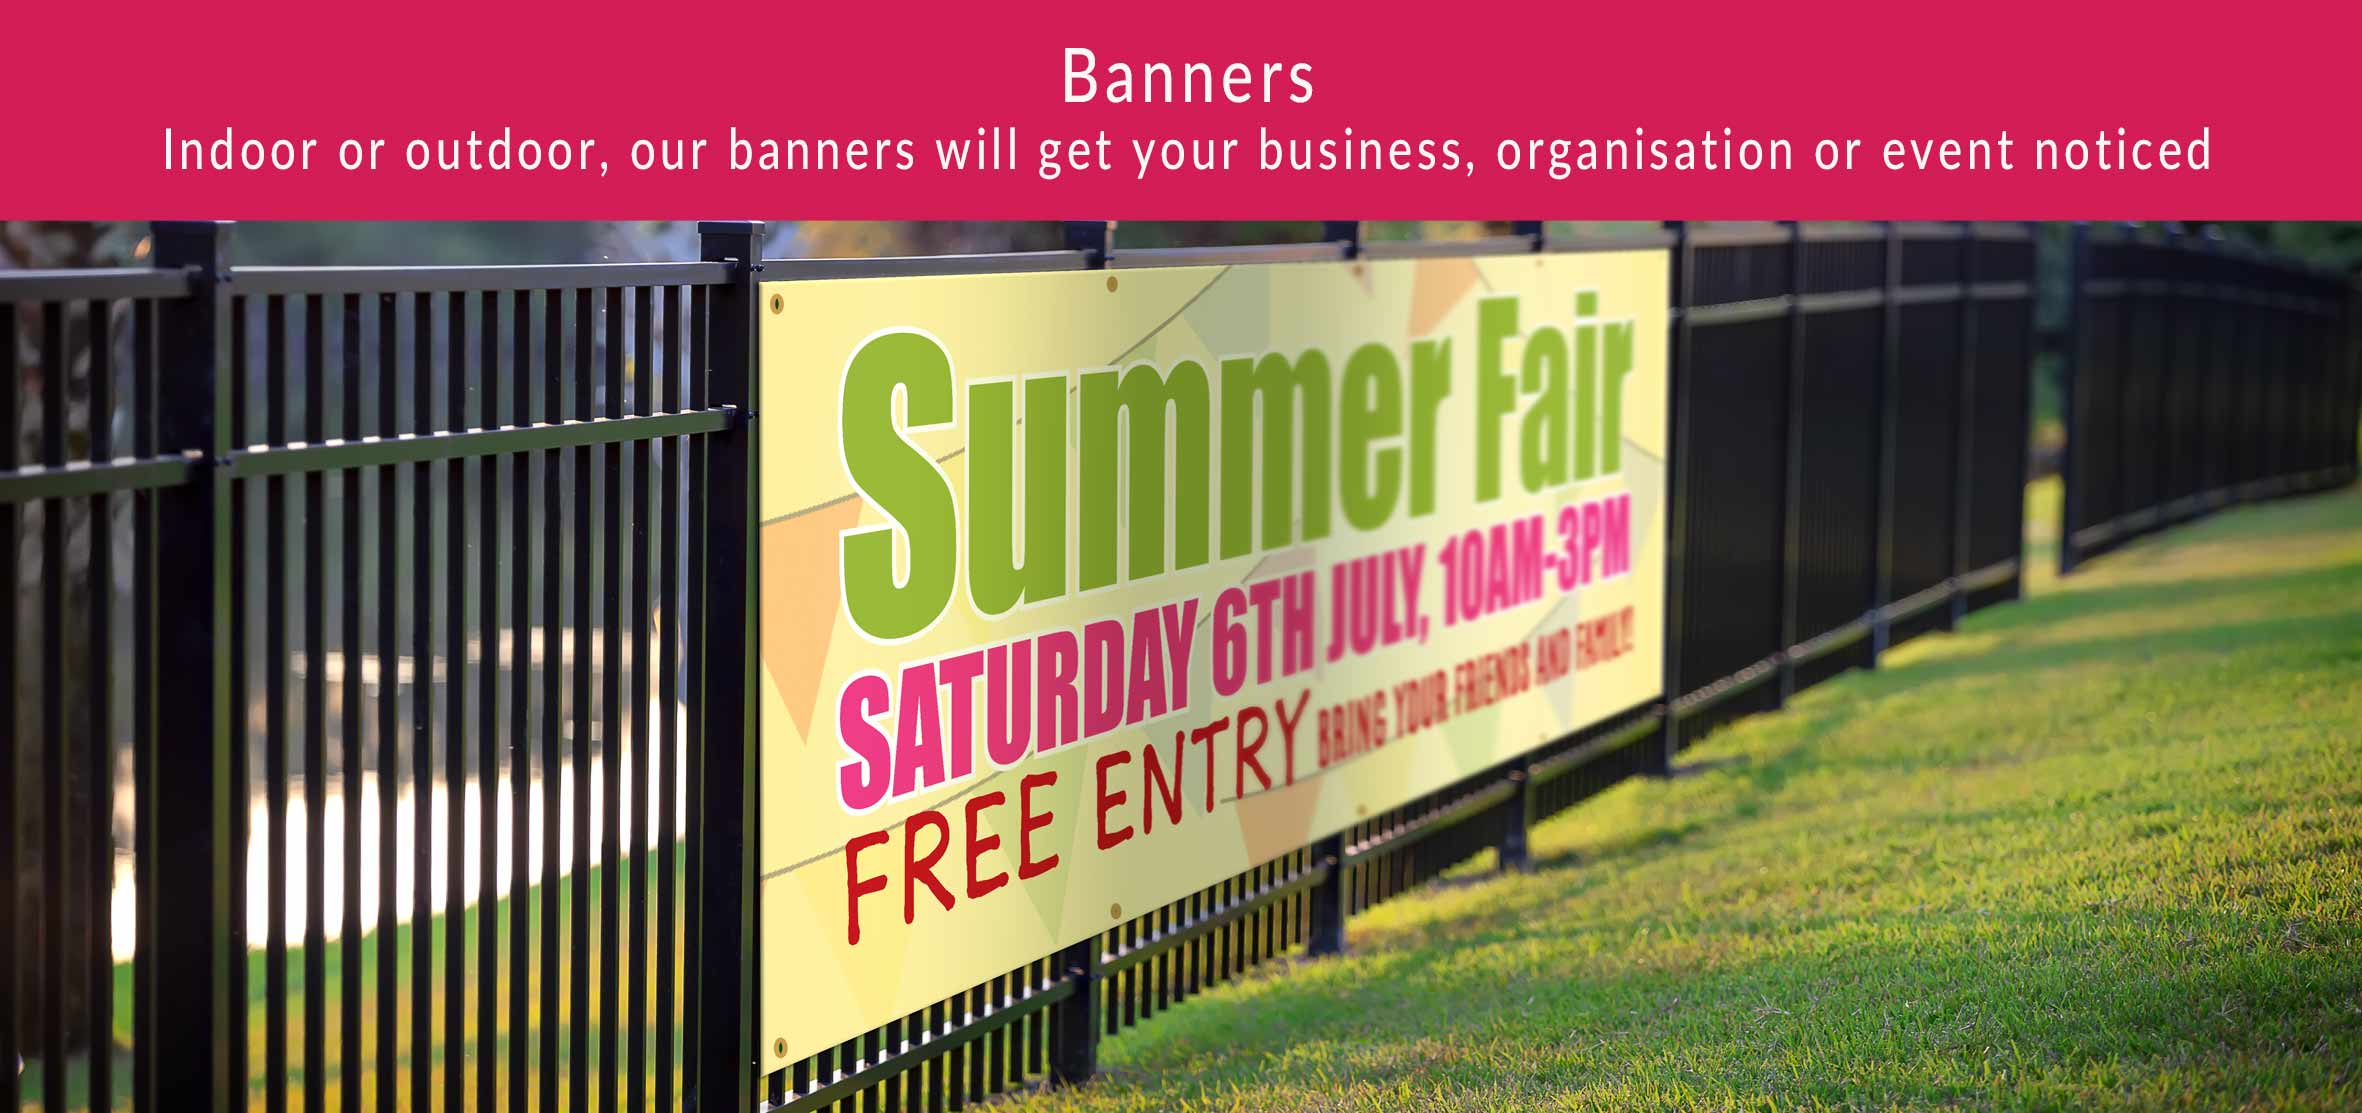 Indoor or outdoor, pur banners will get your business, organisation or event noticed